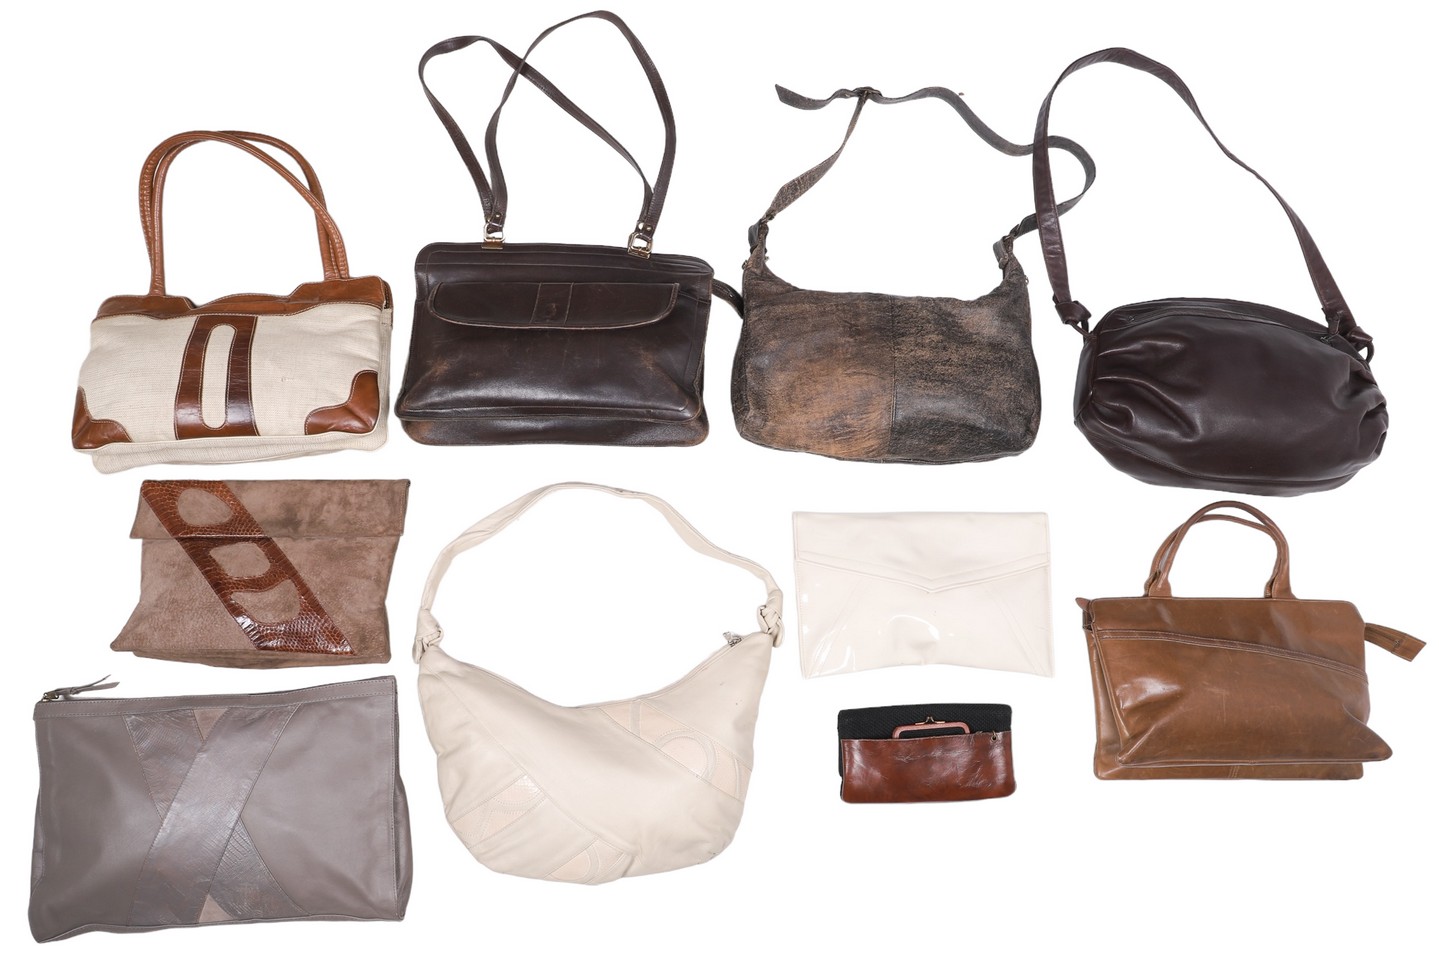  8 Leather and style vintage 27a6f5